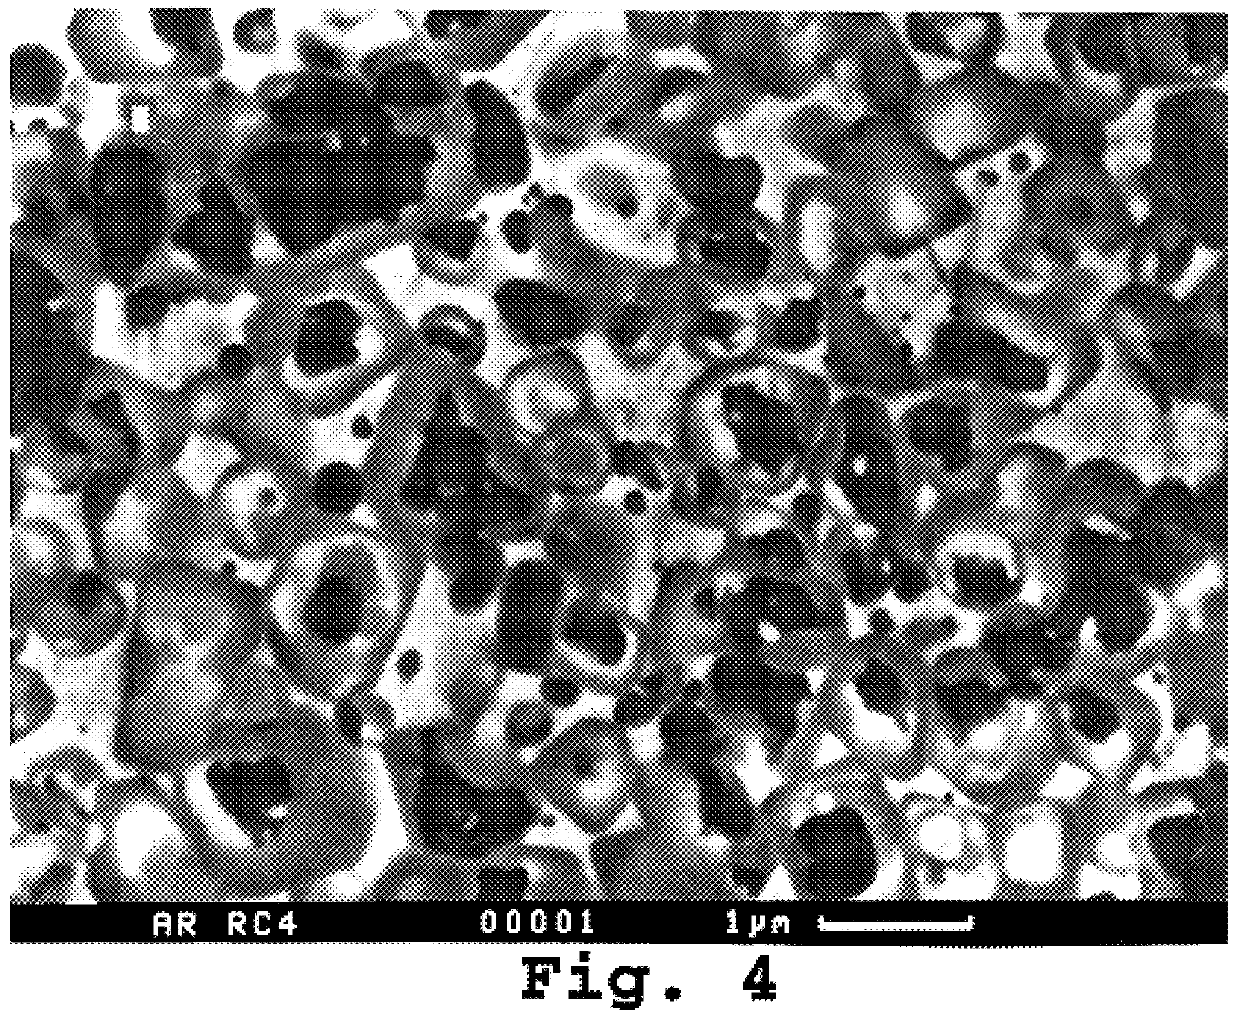 Titanium-based carbonitride alloy with controllable wear resistance and toughness